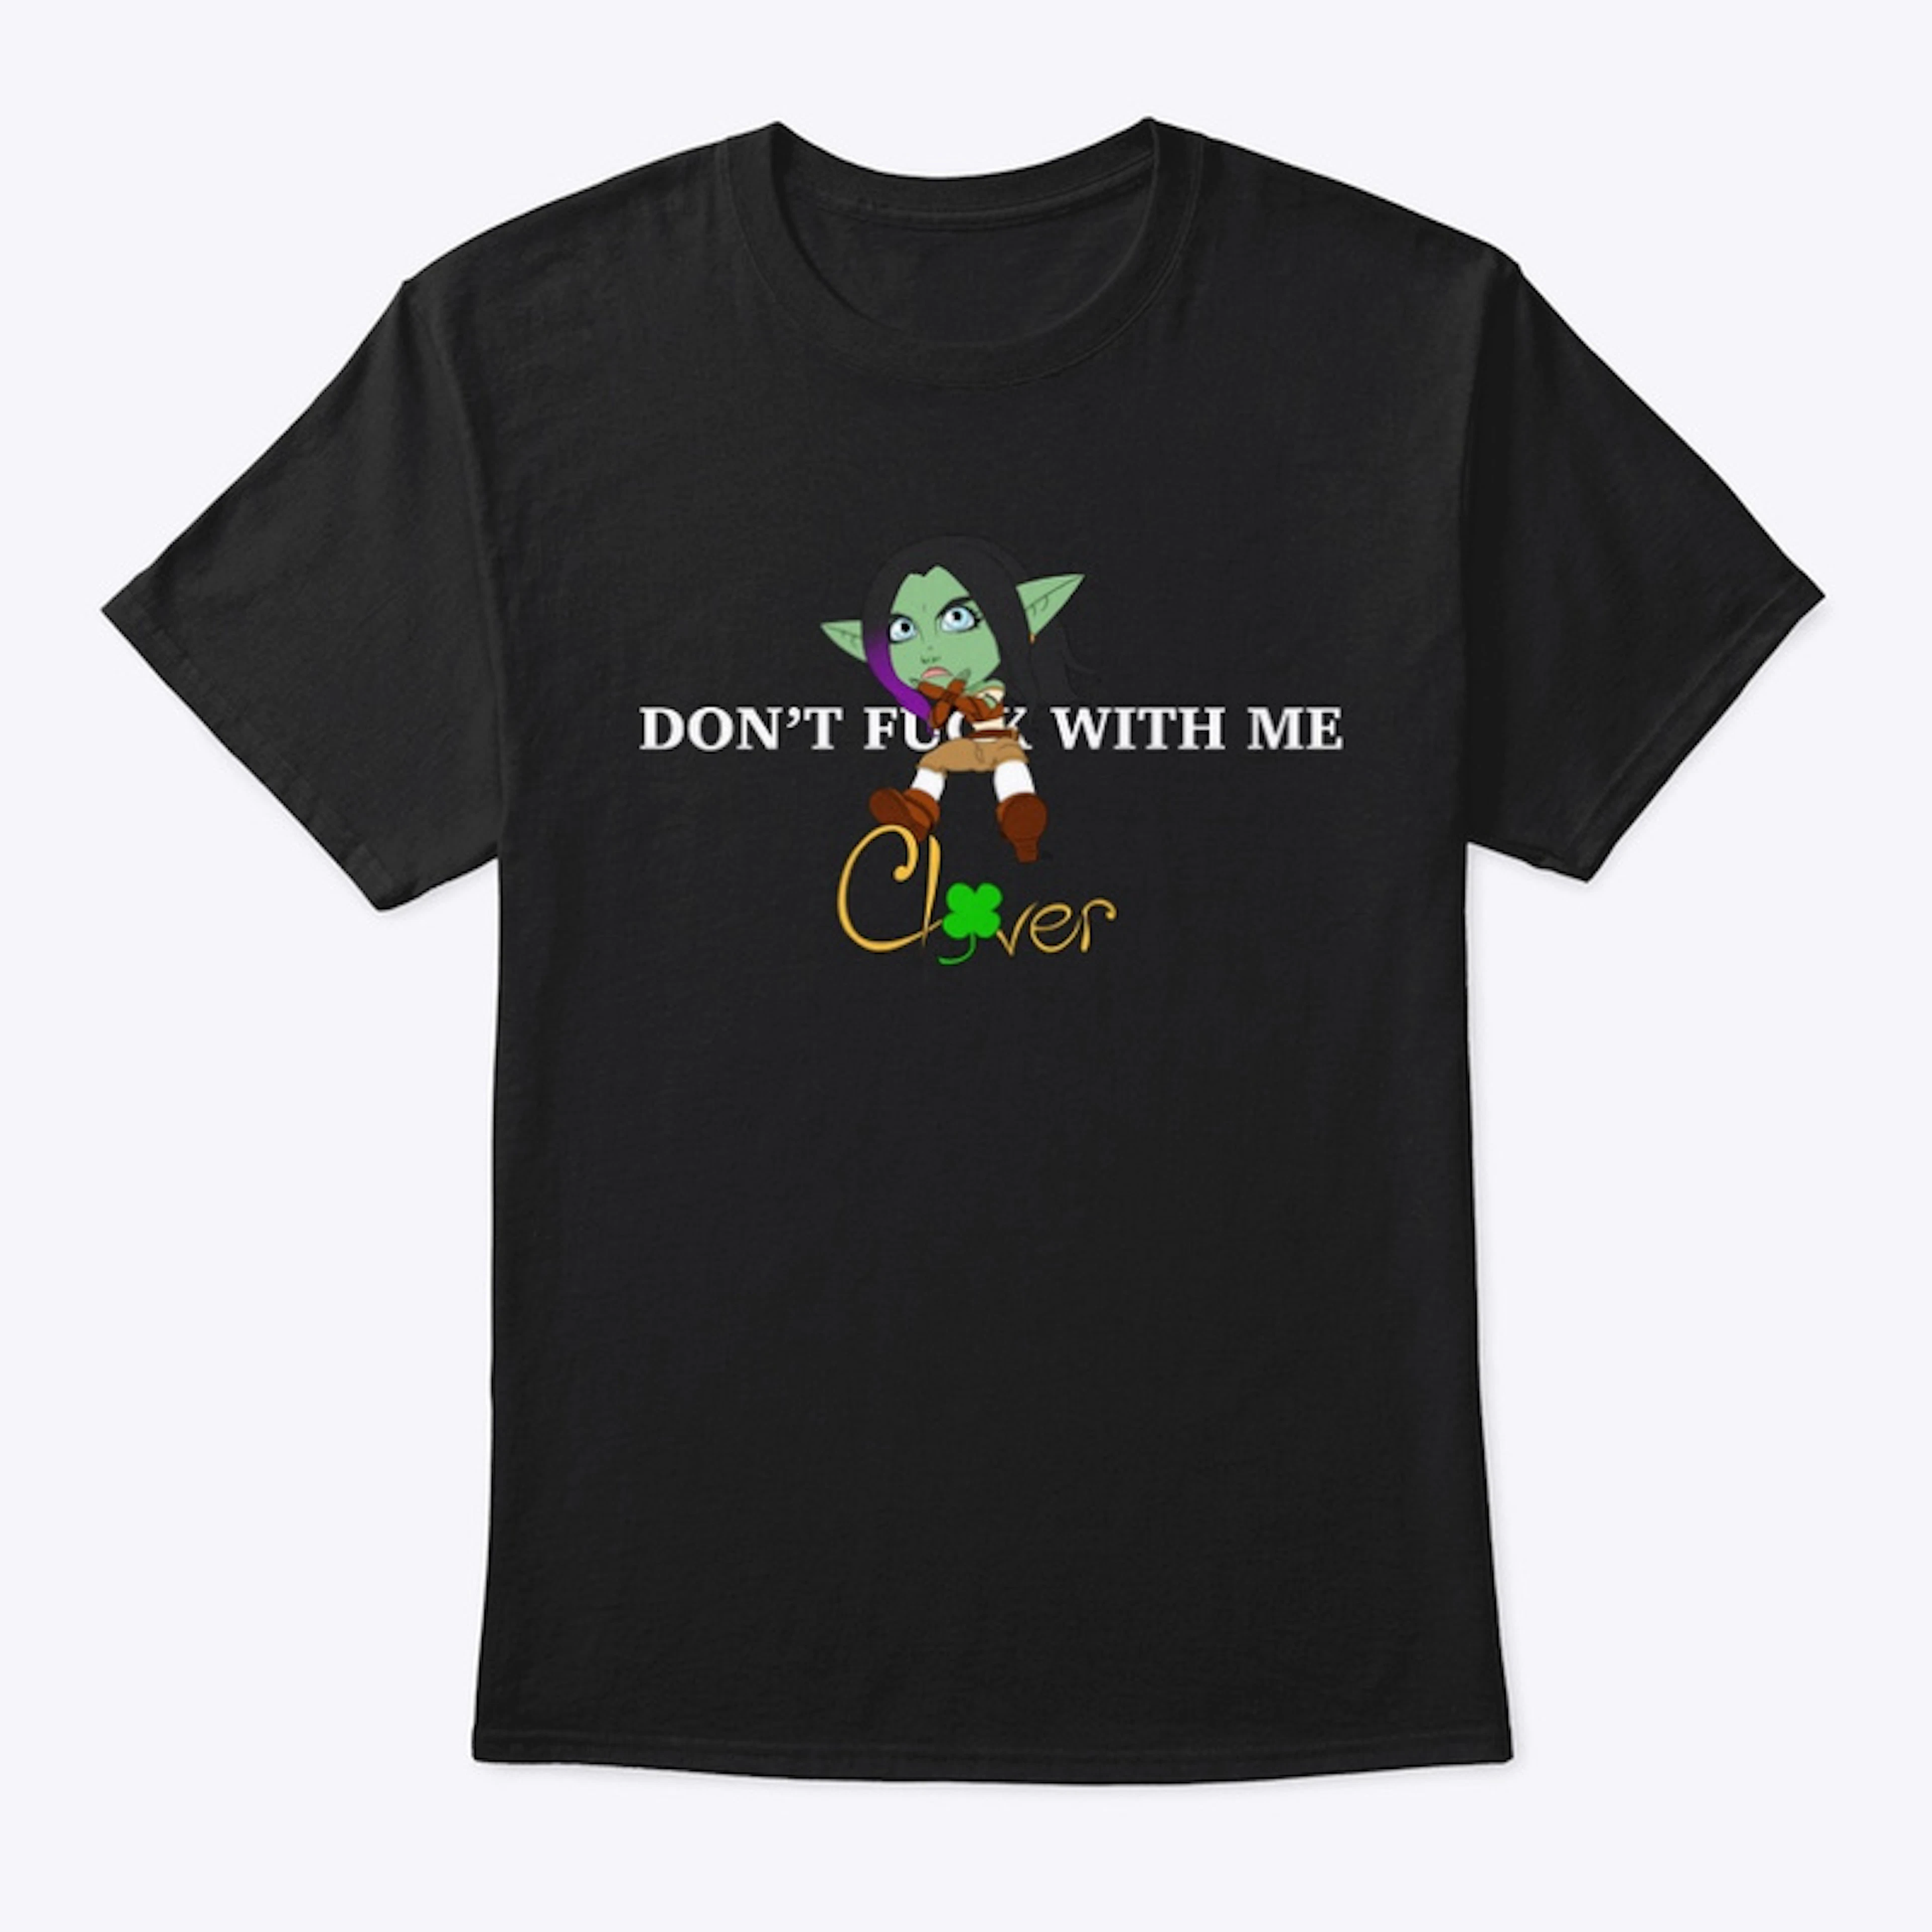 Don’t mess with me Clover shirt